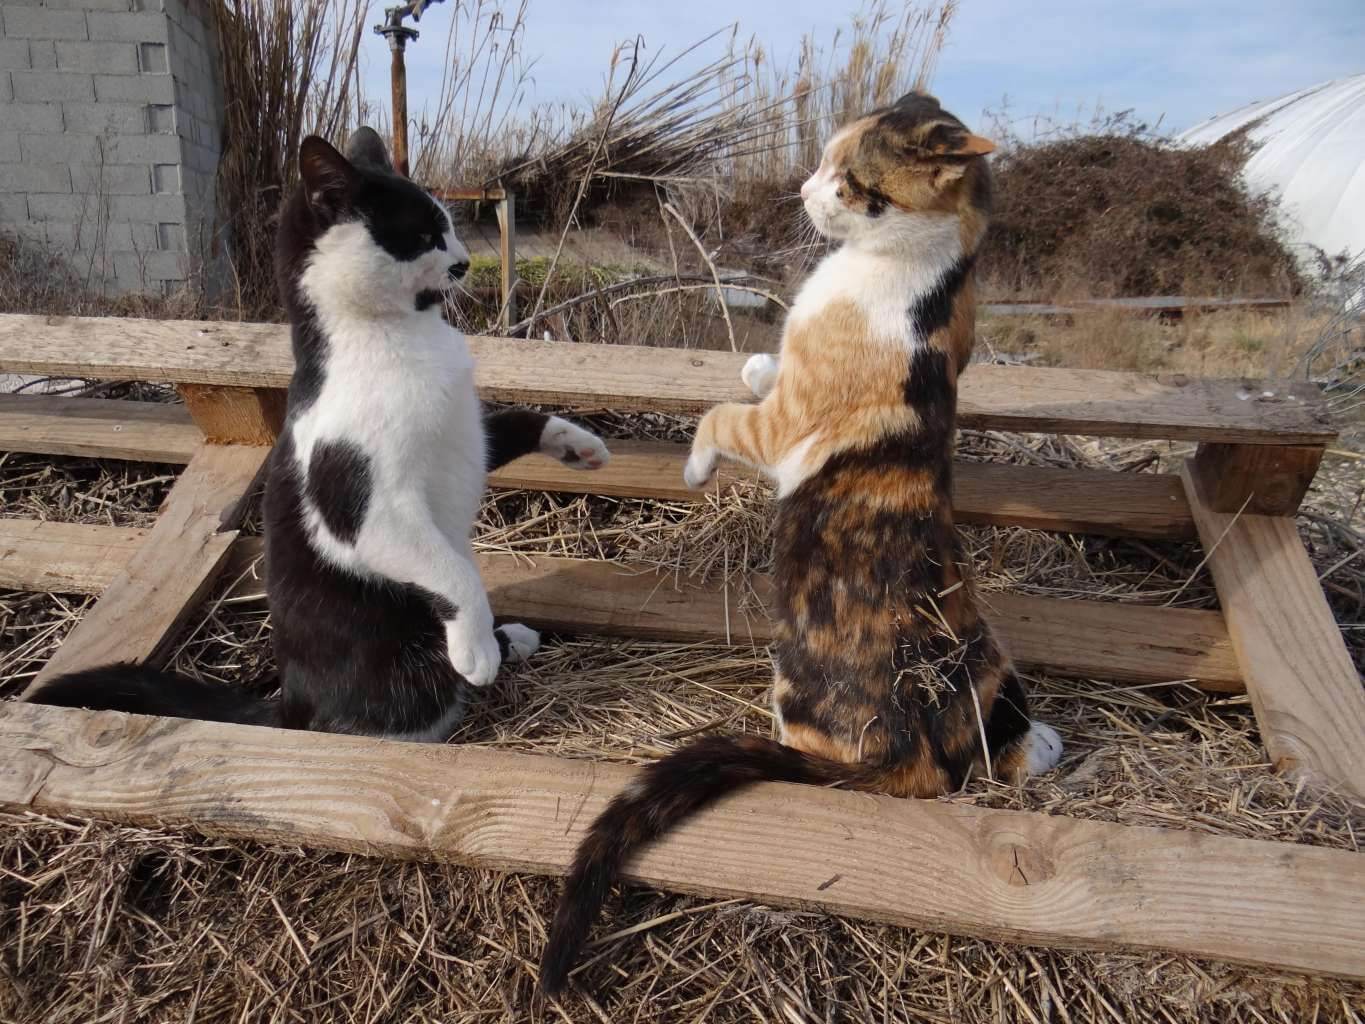  Cats Talking To Each Other